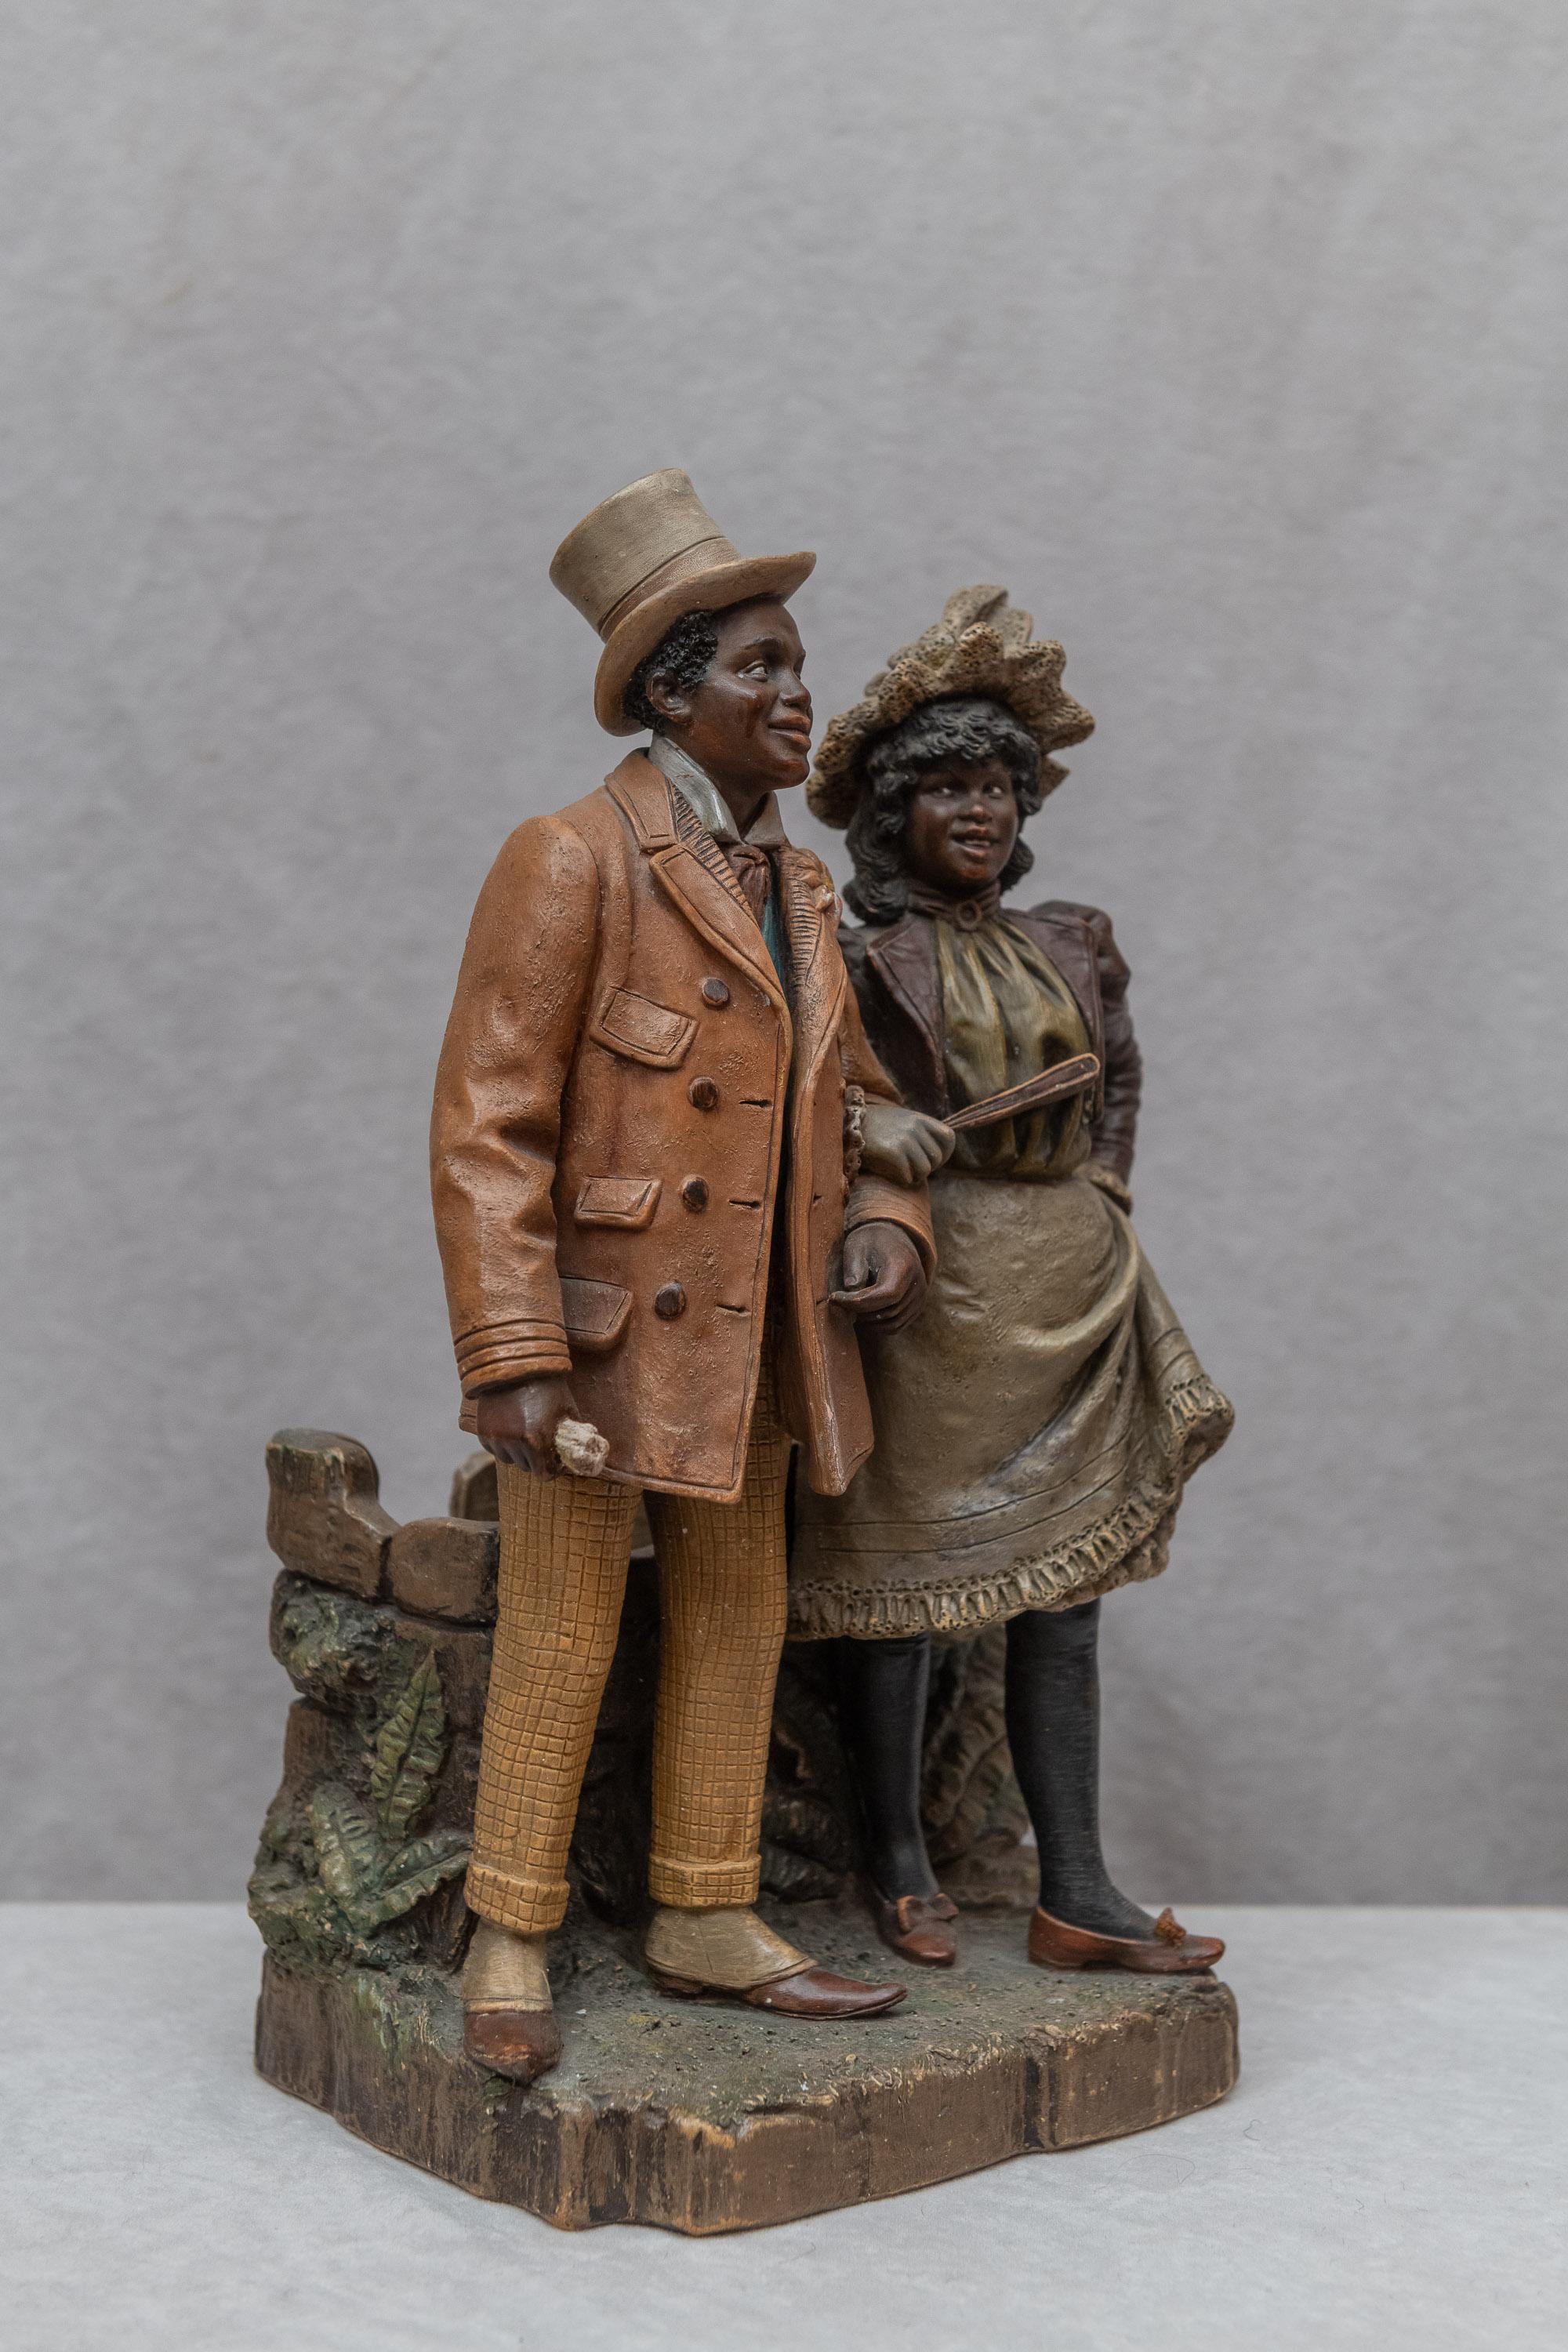 Terracotta is a wonderful material used to make some of the finest sculpture. As much as we love selling bronze sculpture we find that work can done even finer using terracotta. When you add the meticulous paint to the figures it makes the finished